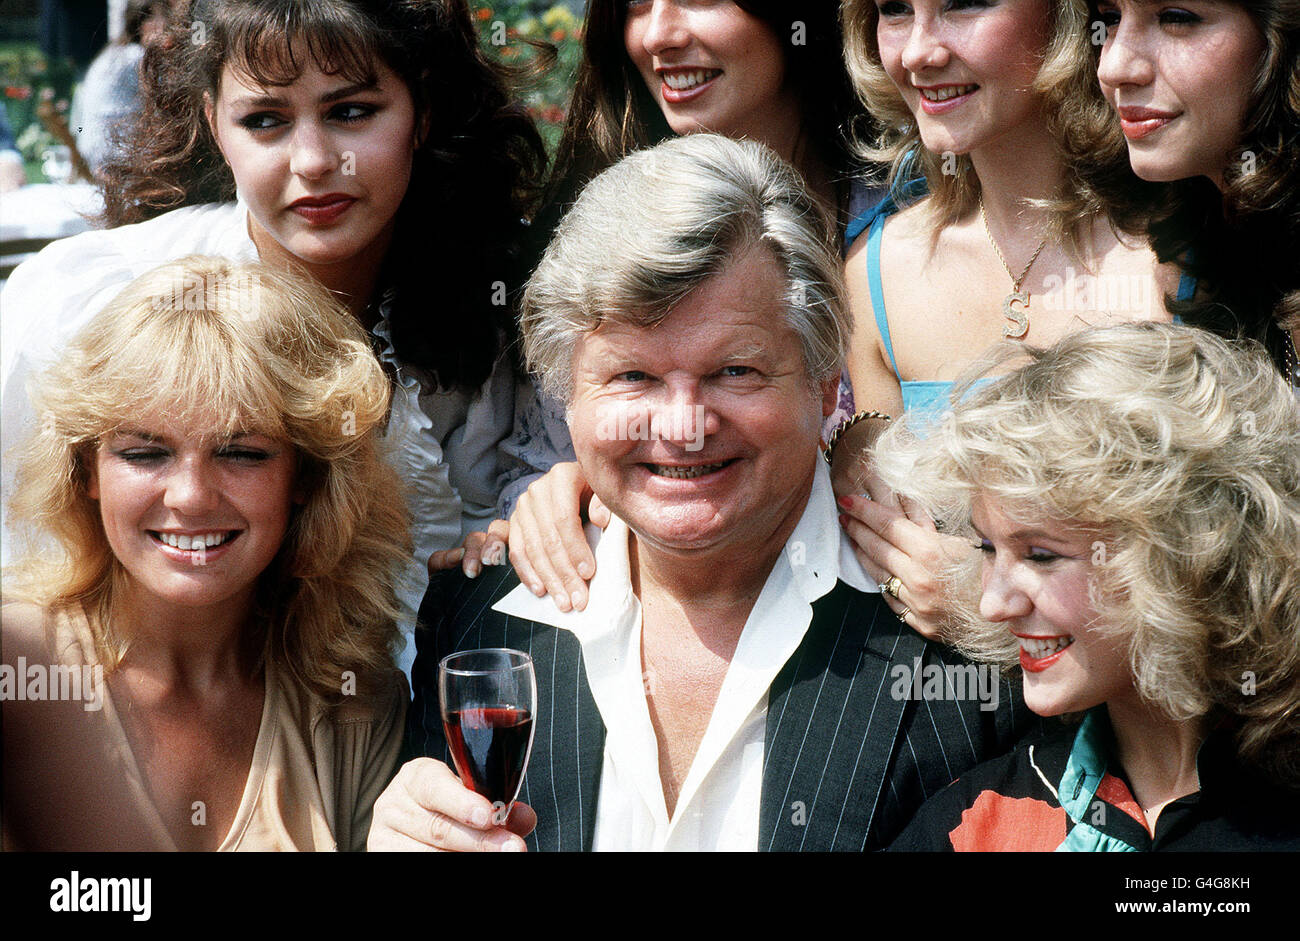 PA NEWS PHOTO 1/8/82 COMEDIAN BENNY HILL WITH A FEAST OF PRETTY GIRLS AT THE THAMES TELEVISION'S ANNUAL GARDEN PARTY IN THE INNER TEMPLE, LONDON ALSO IN THE PICTURE IS ACTRESS JANE LEEVES (TOP LEFT), STAR OF 'FRASIER'. Stock Photo